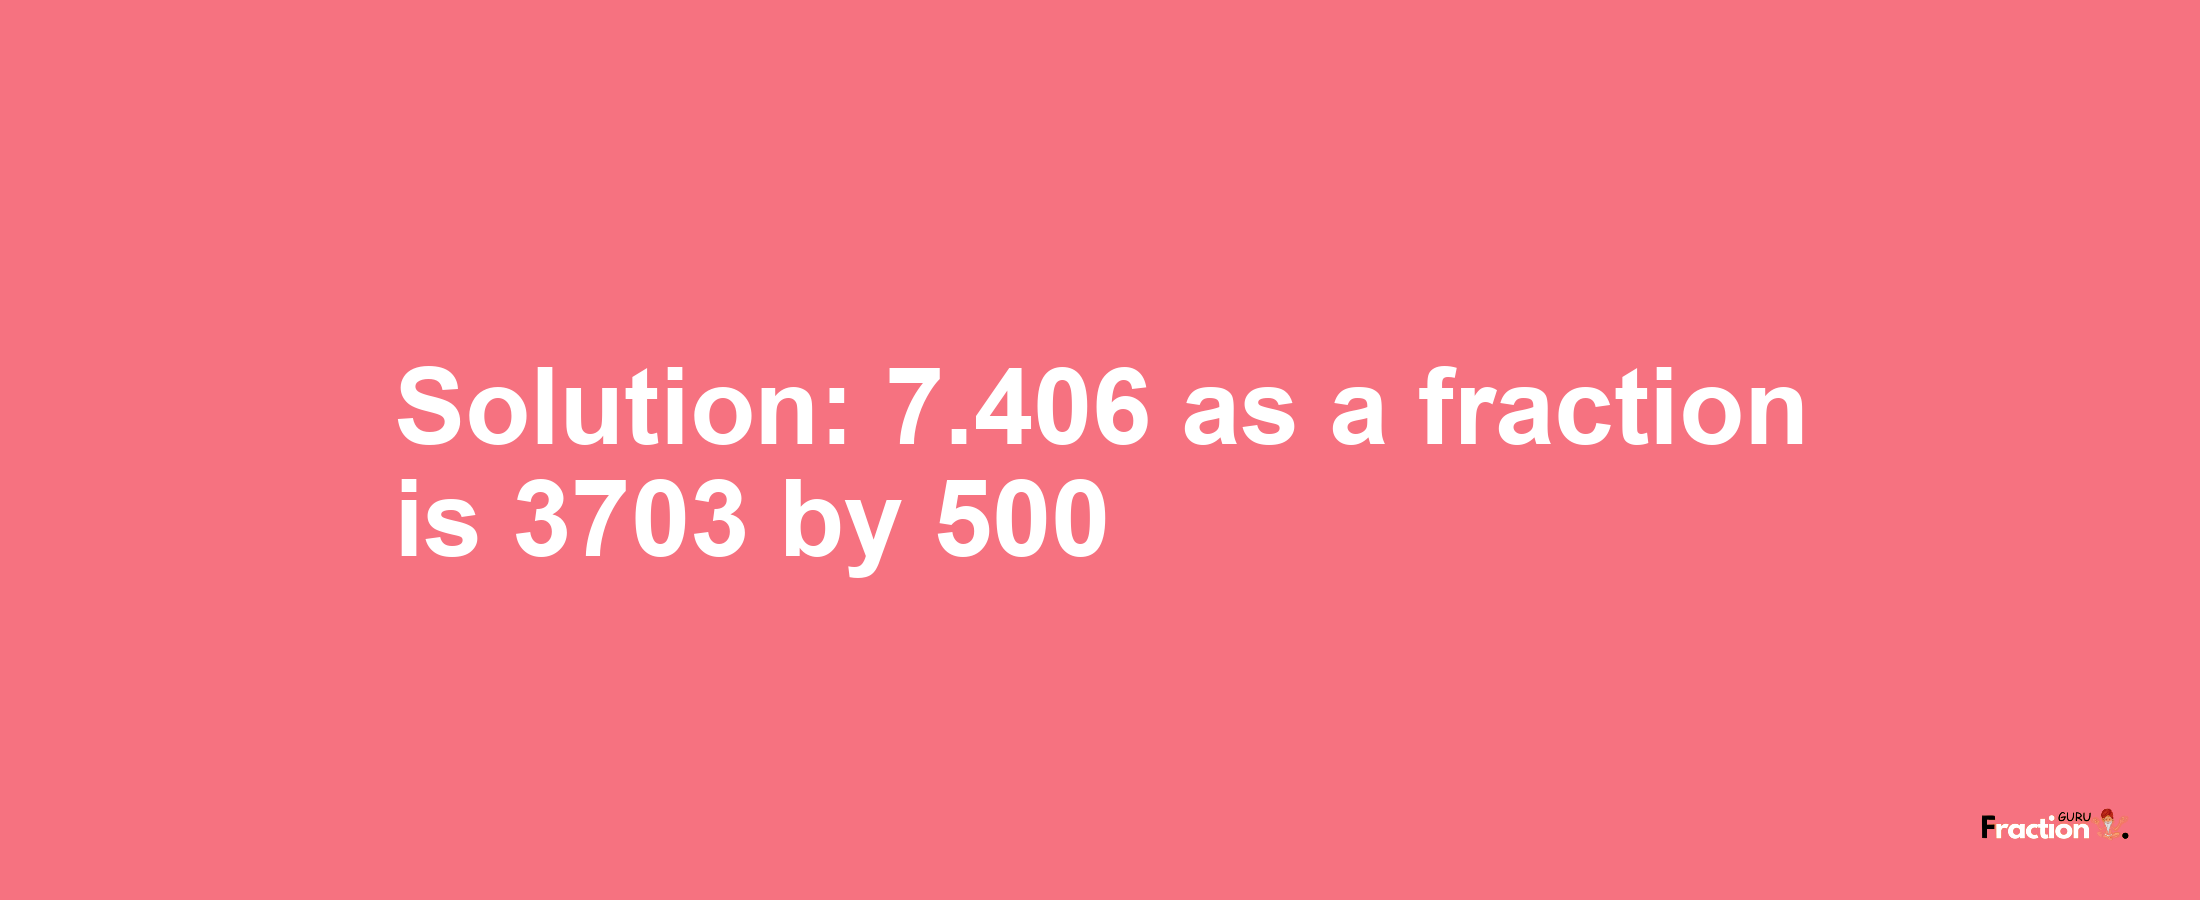 Solution:7.406 as a fraction is 3703/500